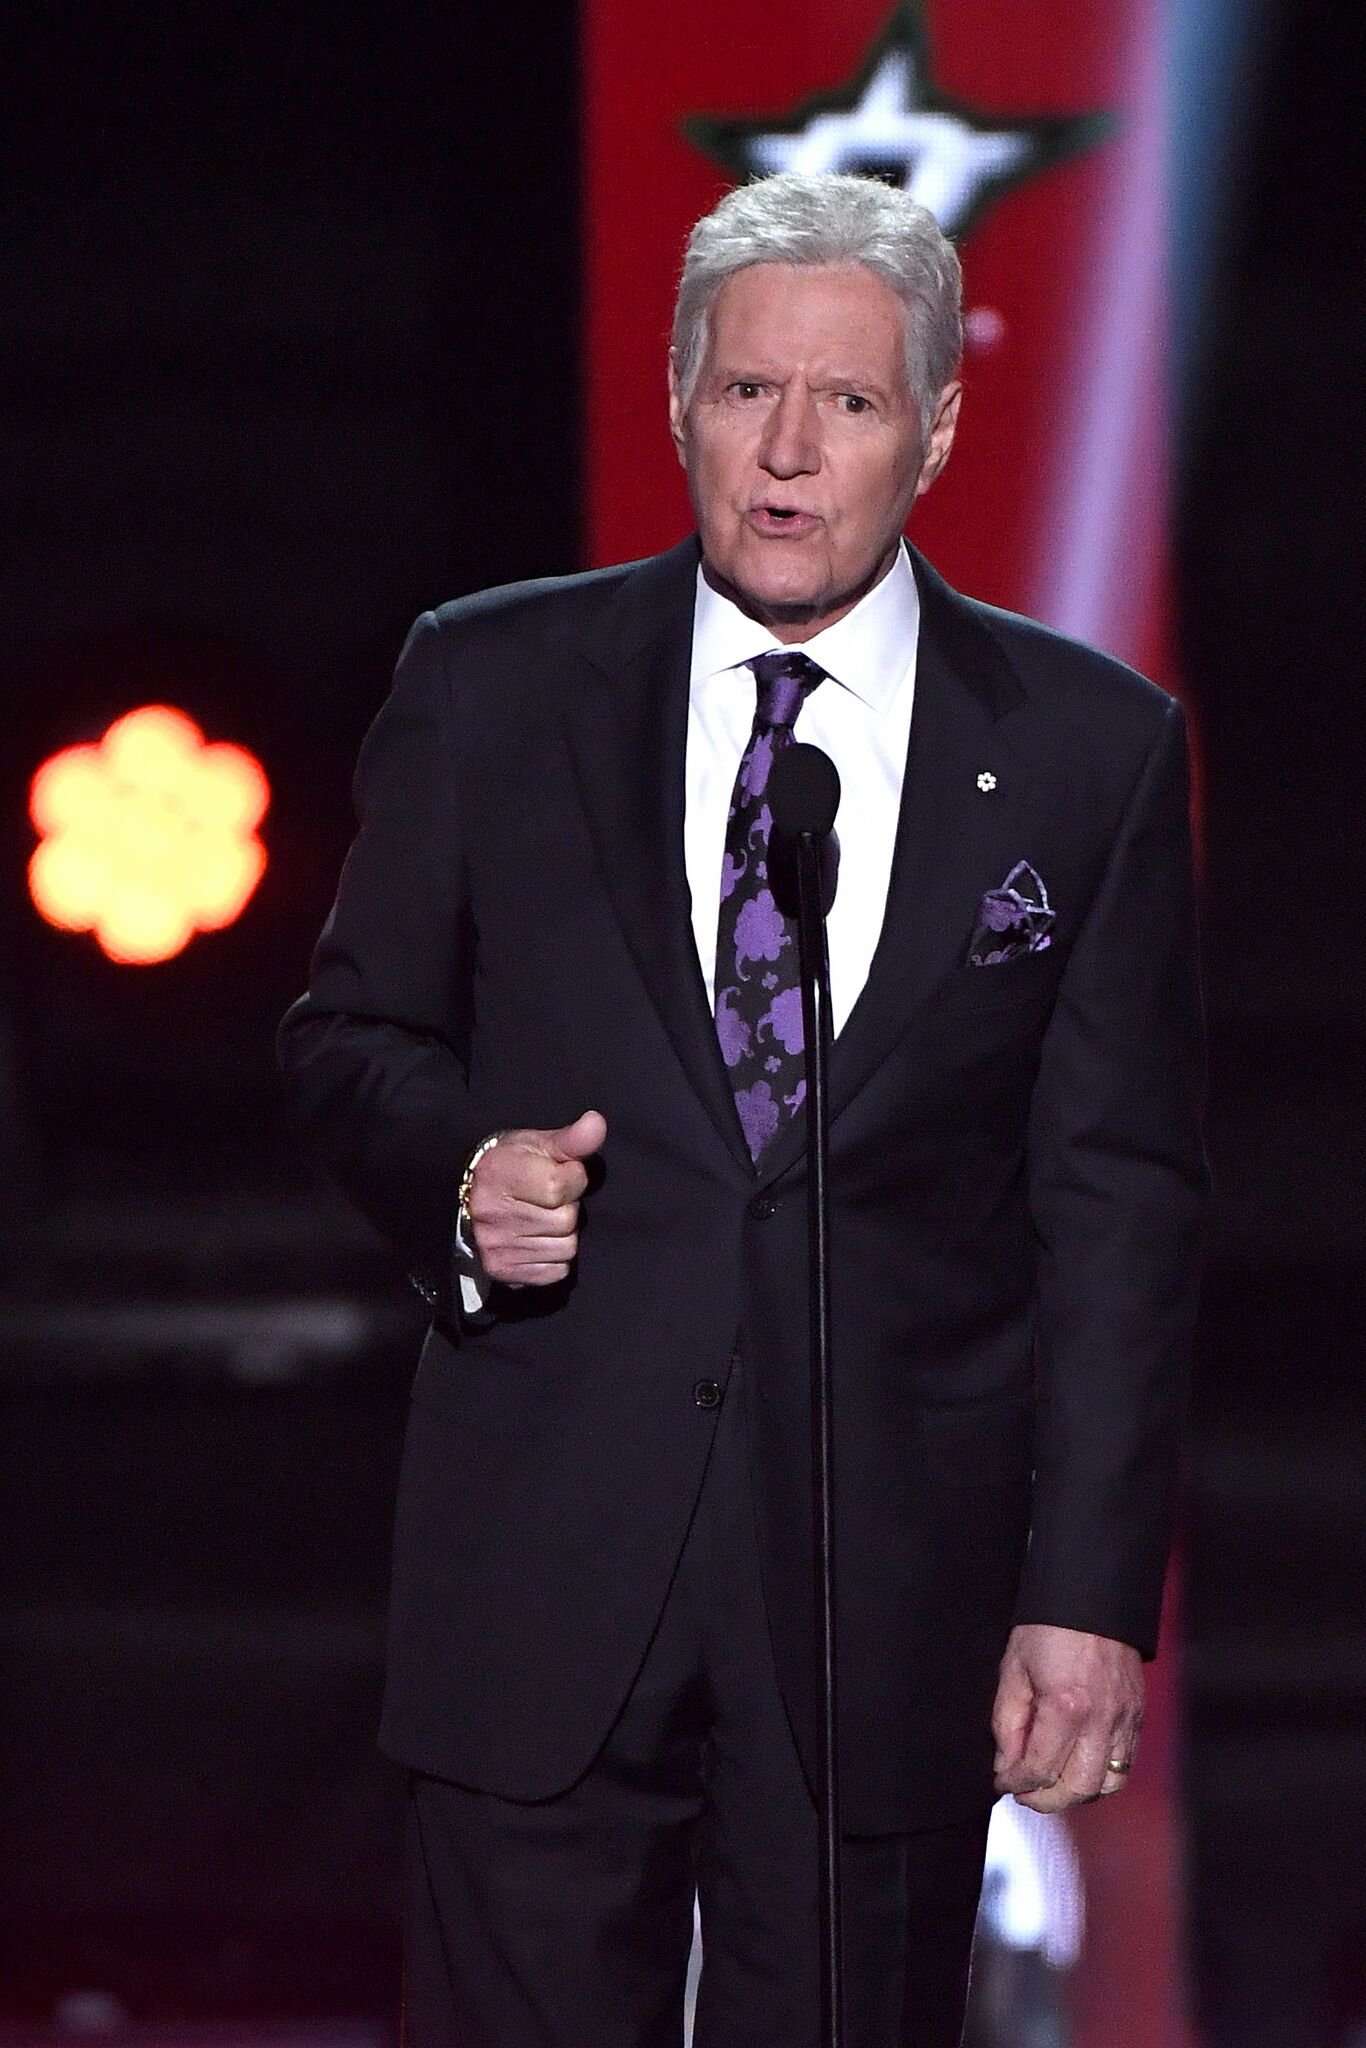 "Jeopardy!" host Alex Trebek presents the Hart Memorial Trophy during the 2019 NHL Awards at the Mandalay Bay Events Center | Getty Images